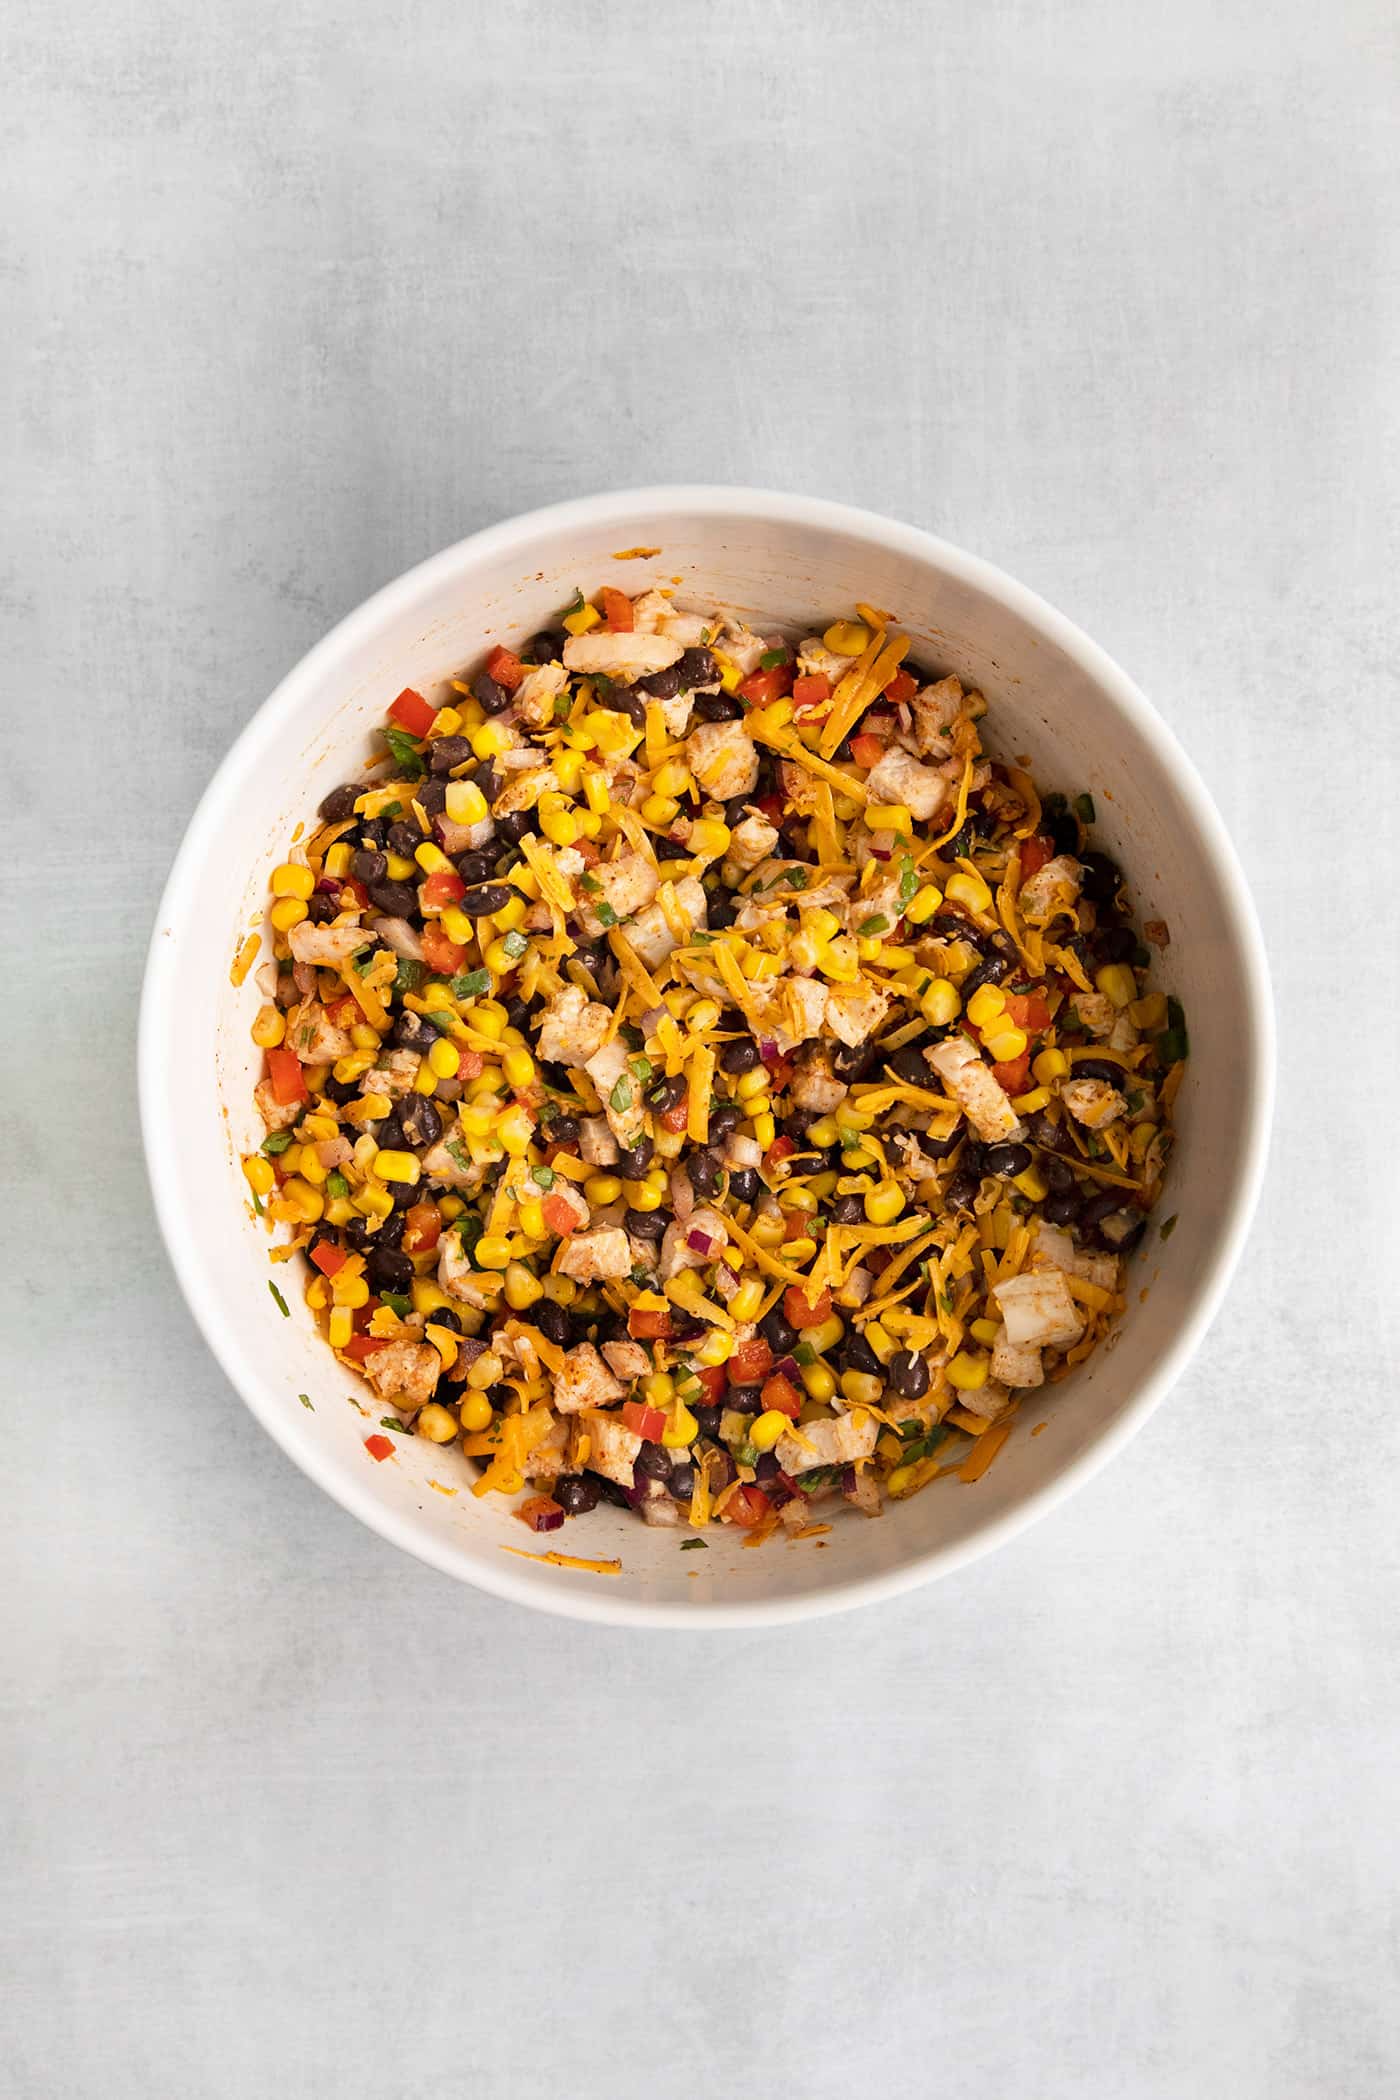 Southwest chicken egg roll ingredients combined in a bowl